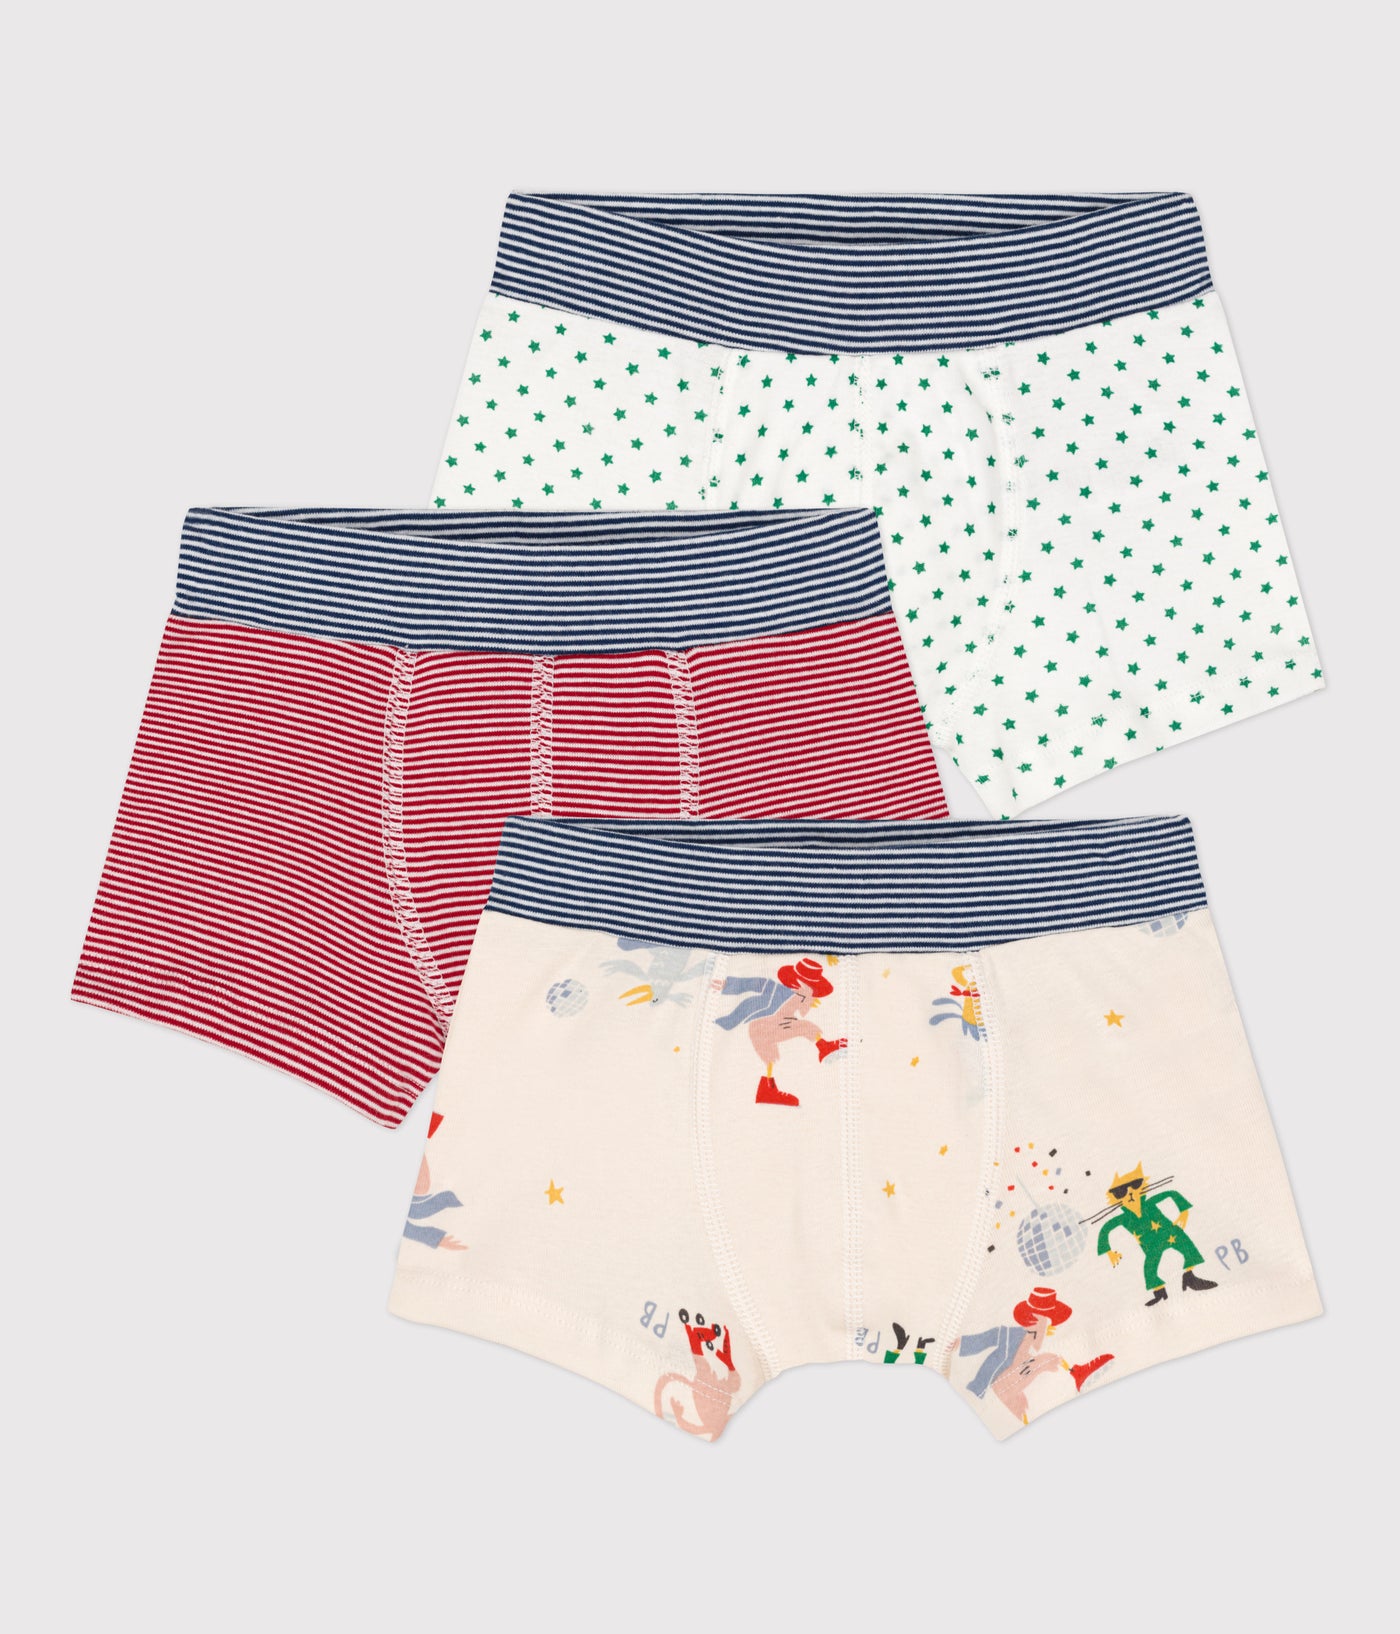 BOYS' COTTON BOXERS + GLOW-IN-THE-DARK PAIR - 3-PACK